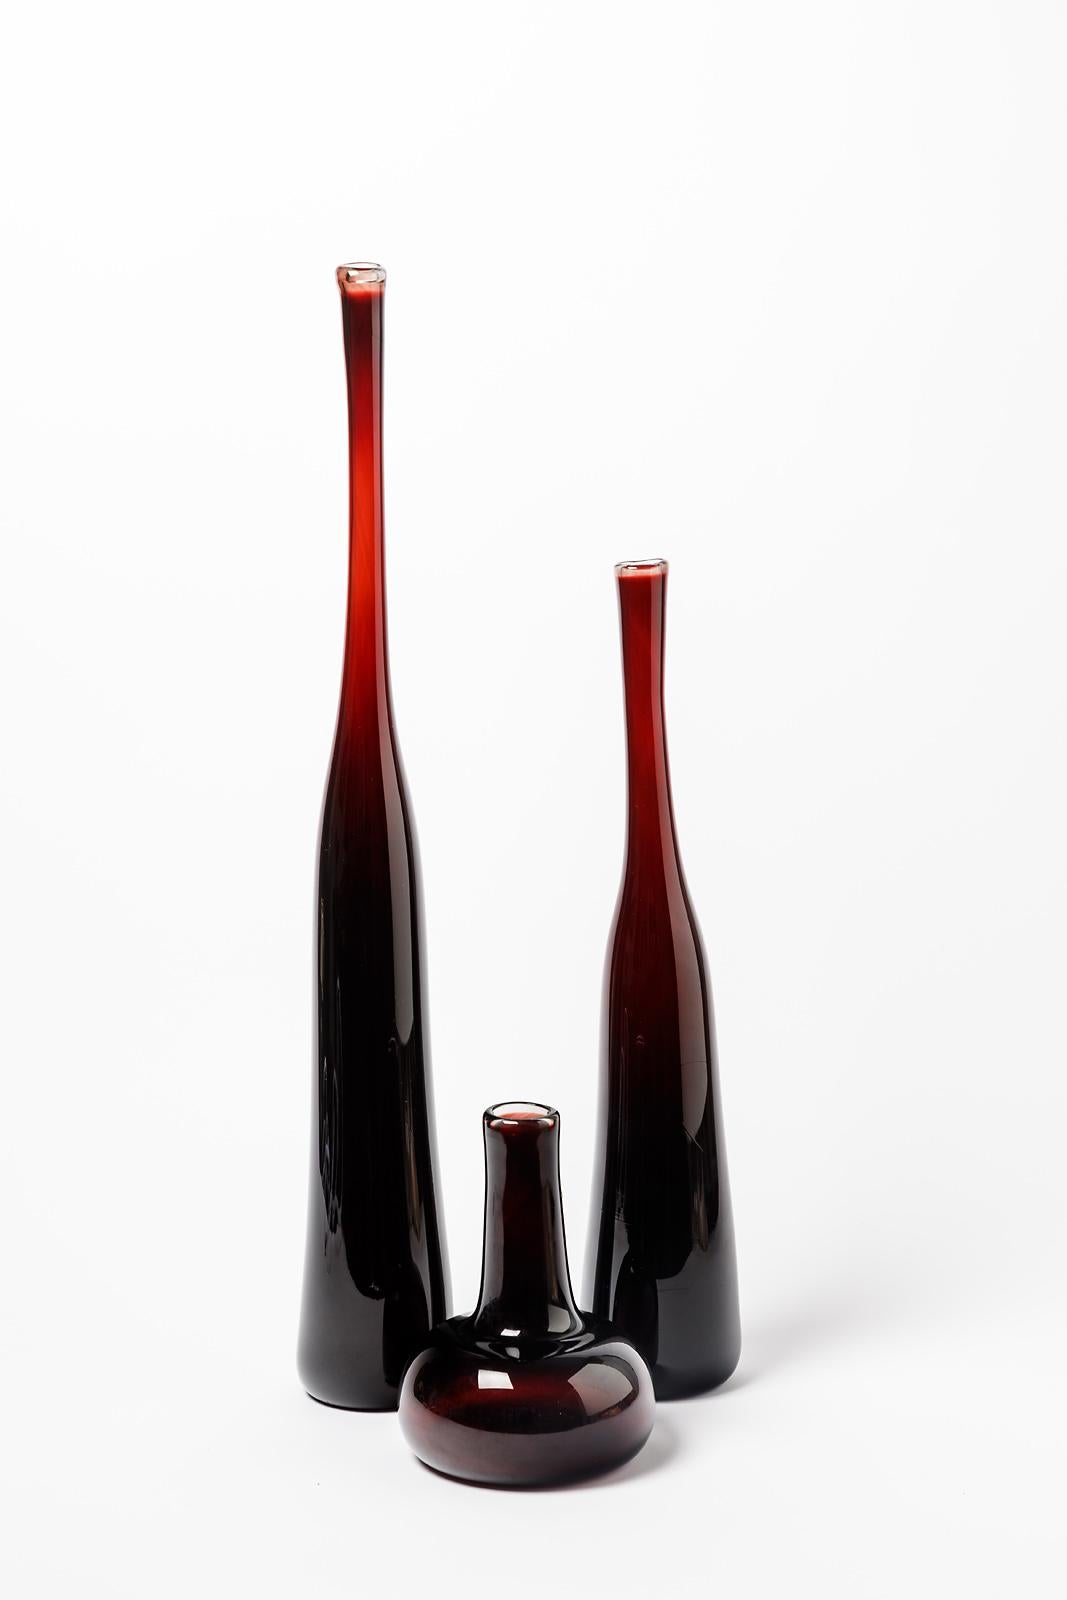 Claude Morin (1932-2021)

Exceptional set of three red glass bottles or vases by french artist CLaude Morin

All pieces are signed 

Original perfect condition

20th century glass design in rare red glass color

Dimensions 
number 1